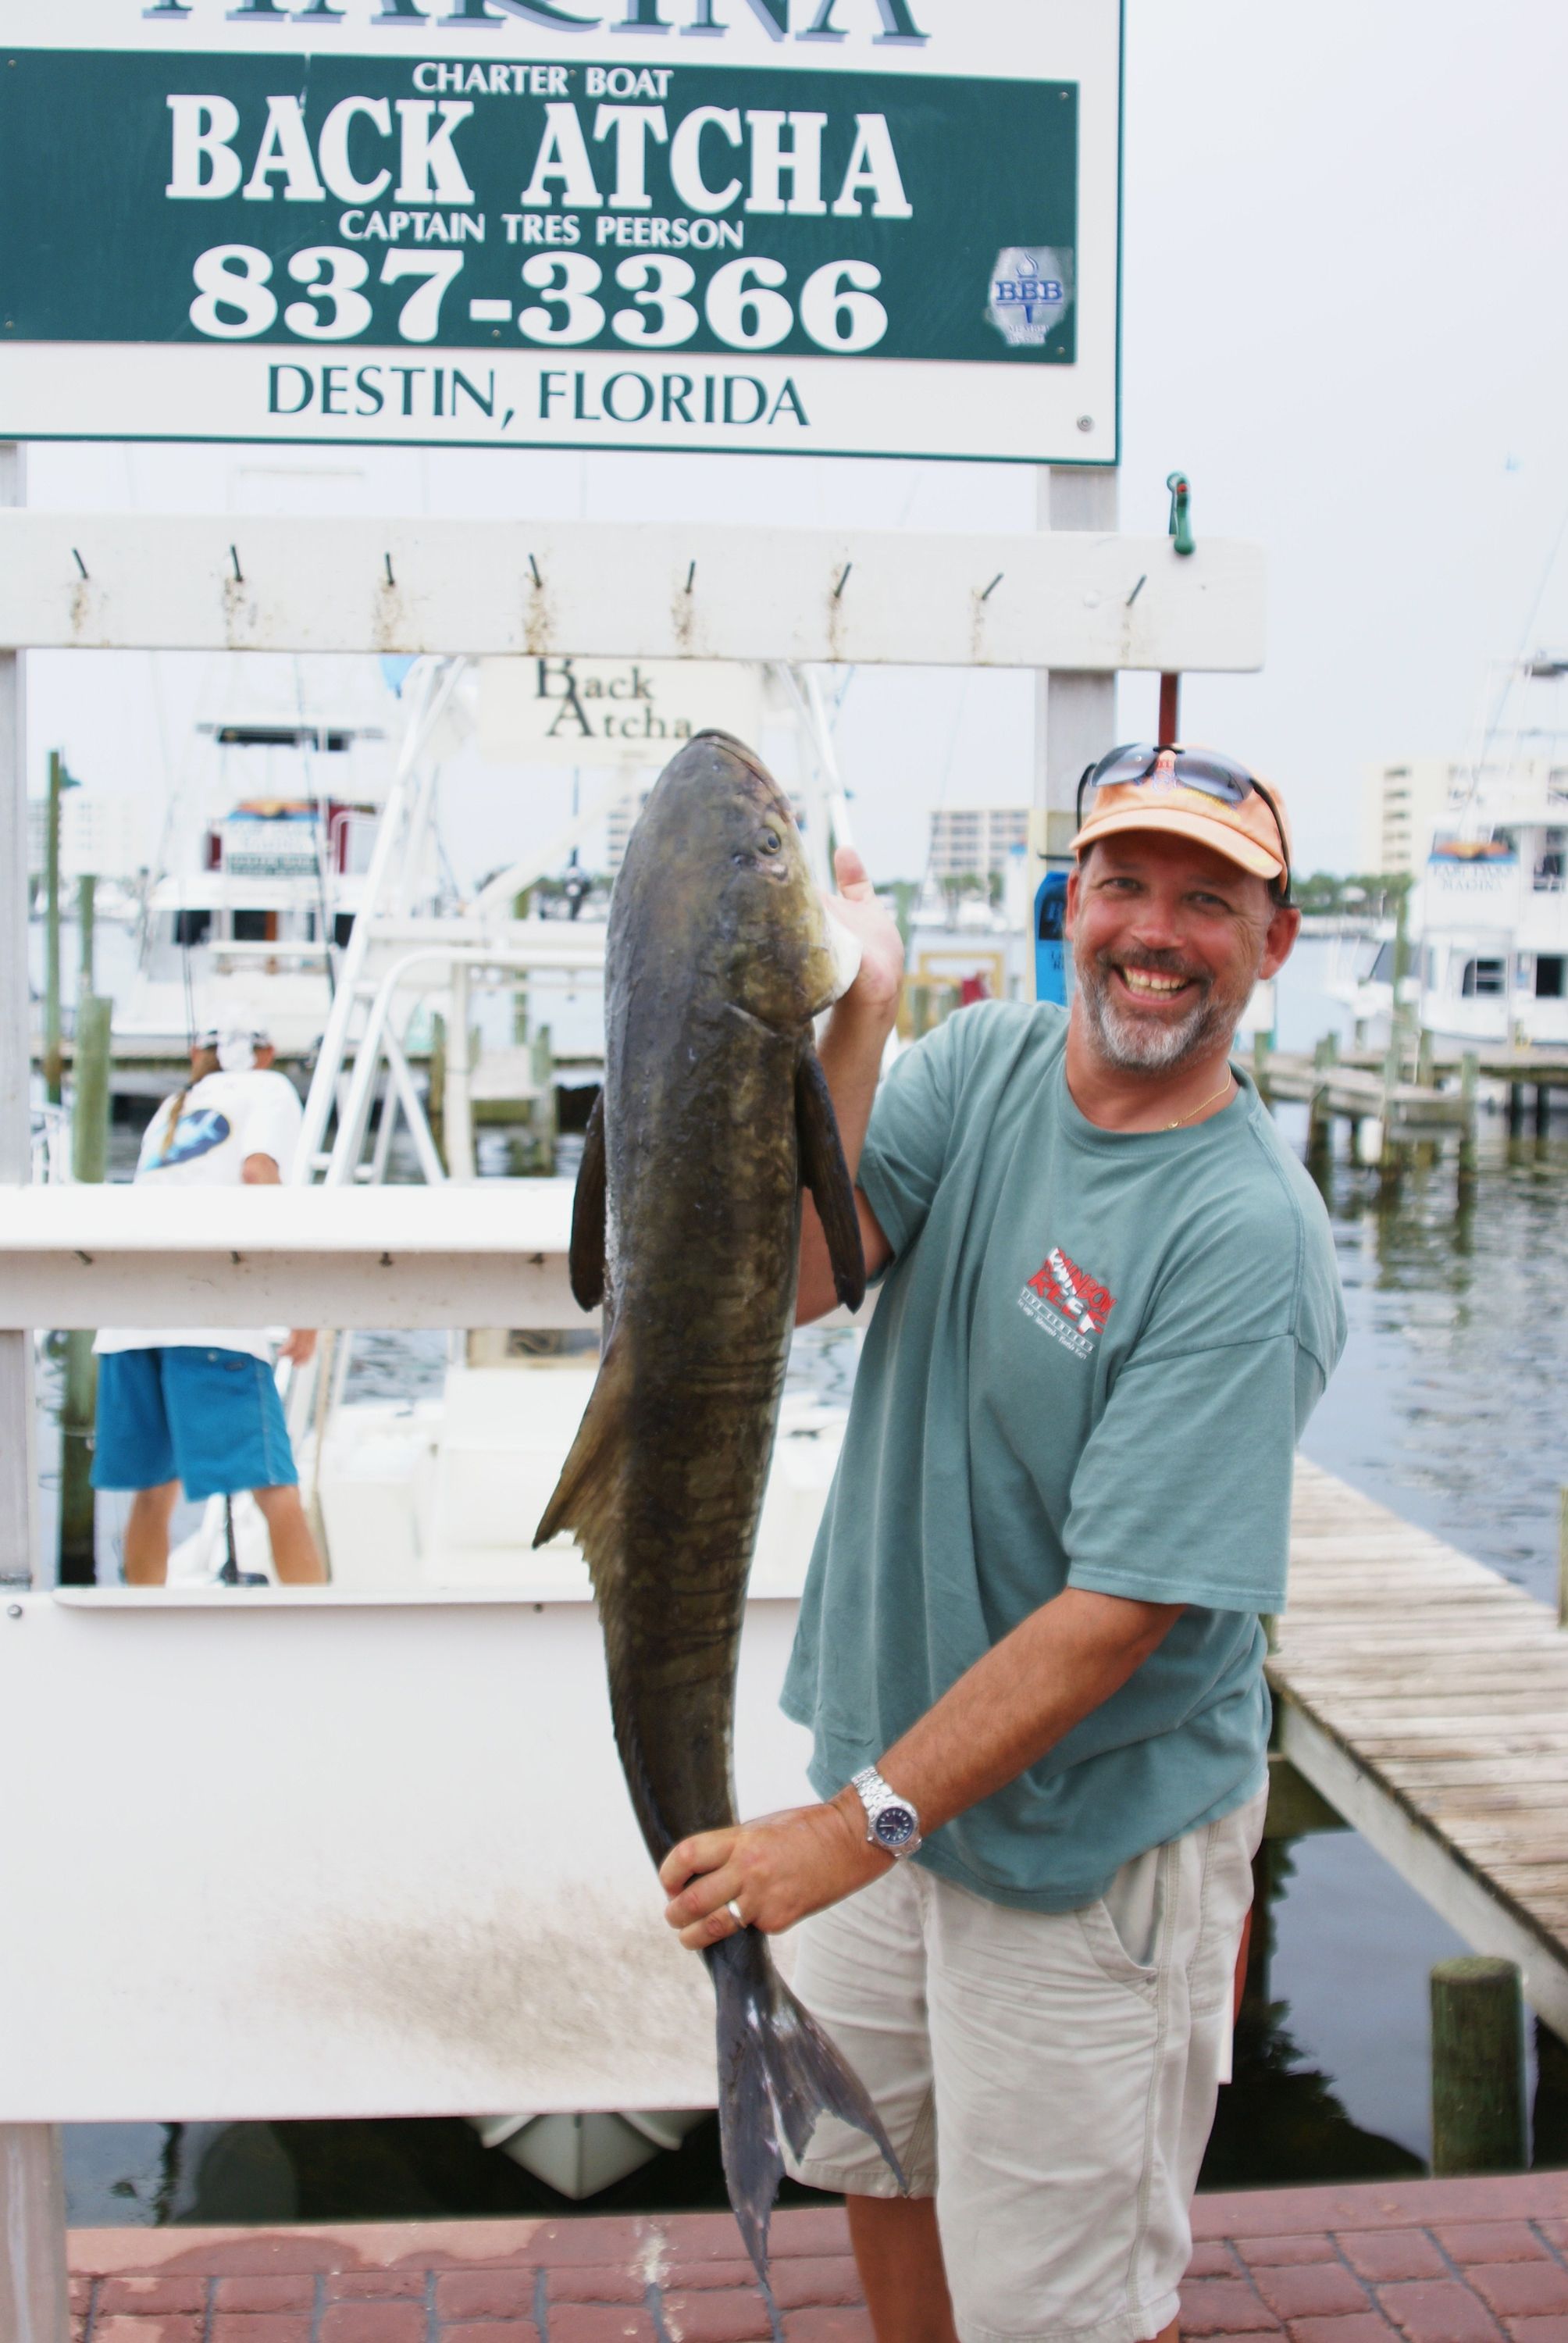 Cobia from charter trip w/Back Atcha